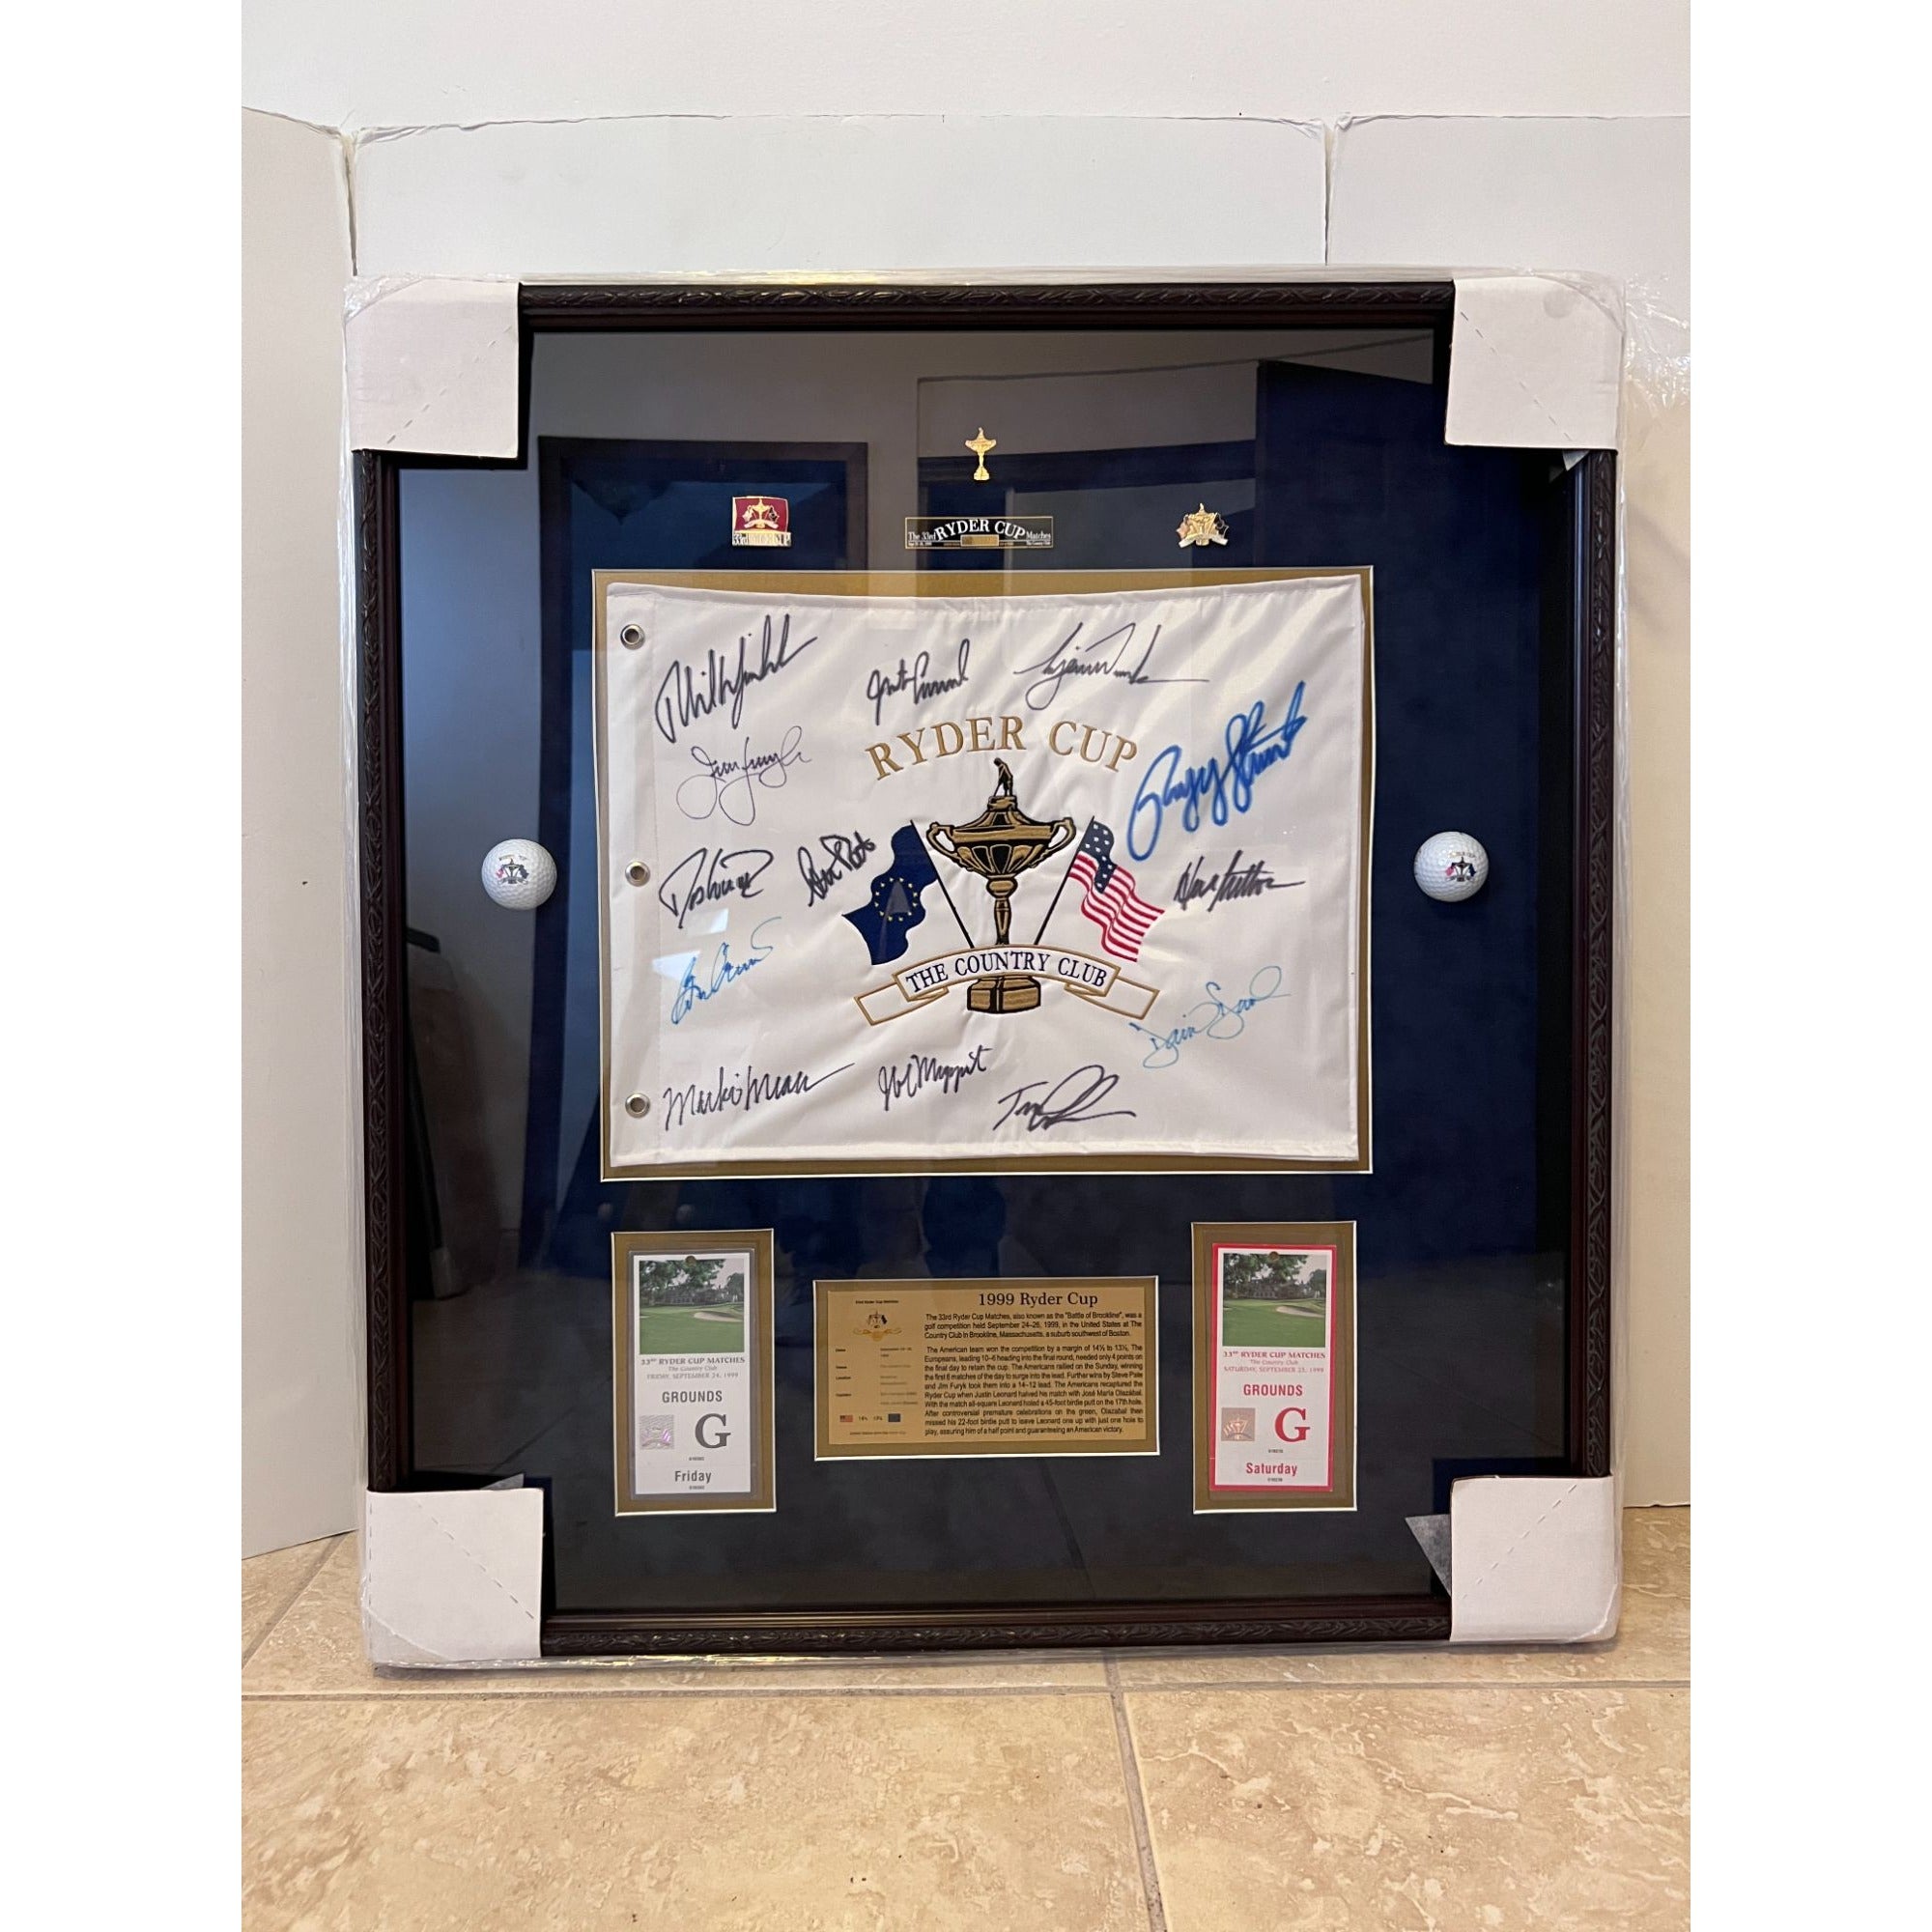 USA 1999 Ryder Cup pin flag framed 28x31 and signed with proof Phil Mickelson Payne Stewart complete team